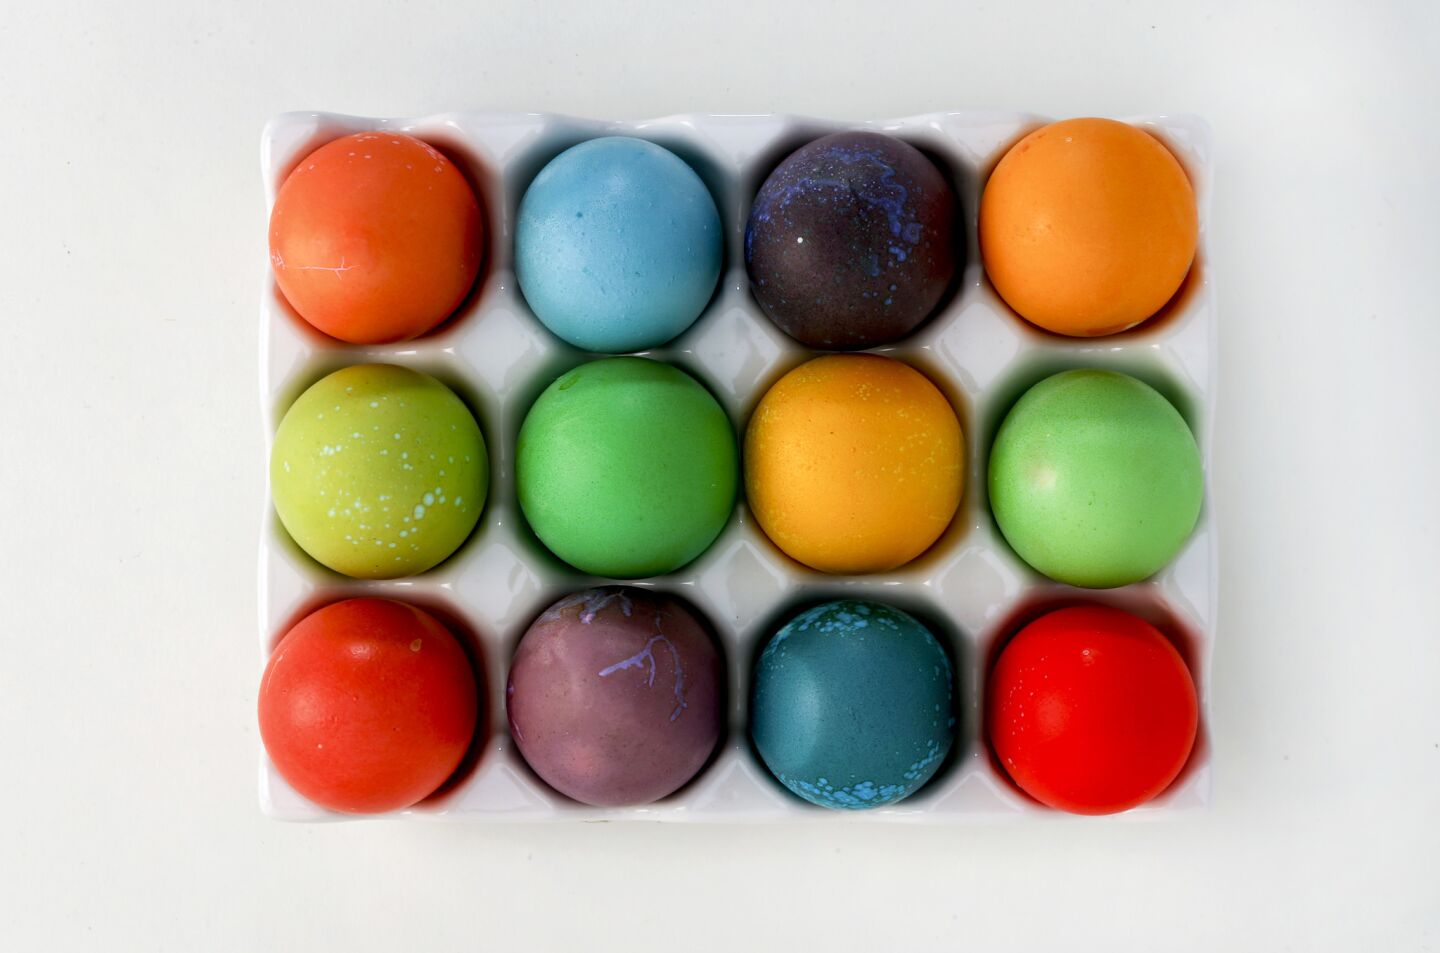 Easter eggs decorated with food coloring dyes.